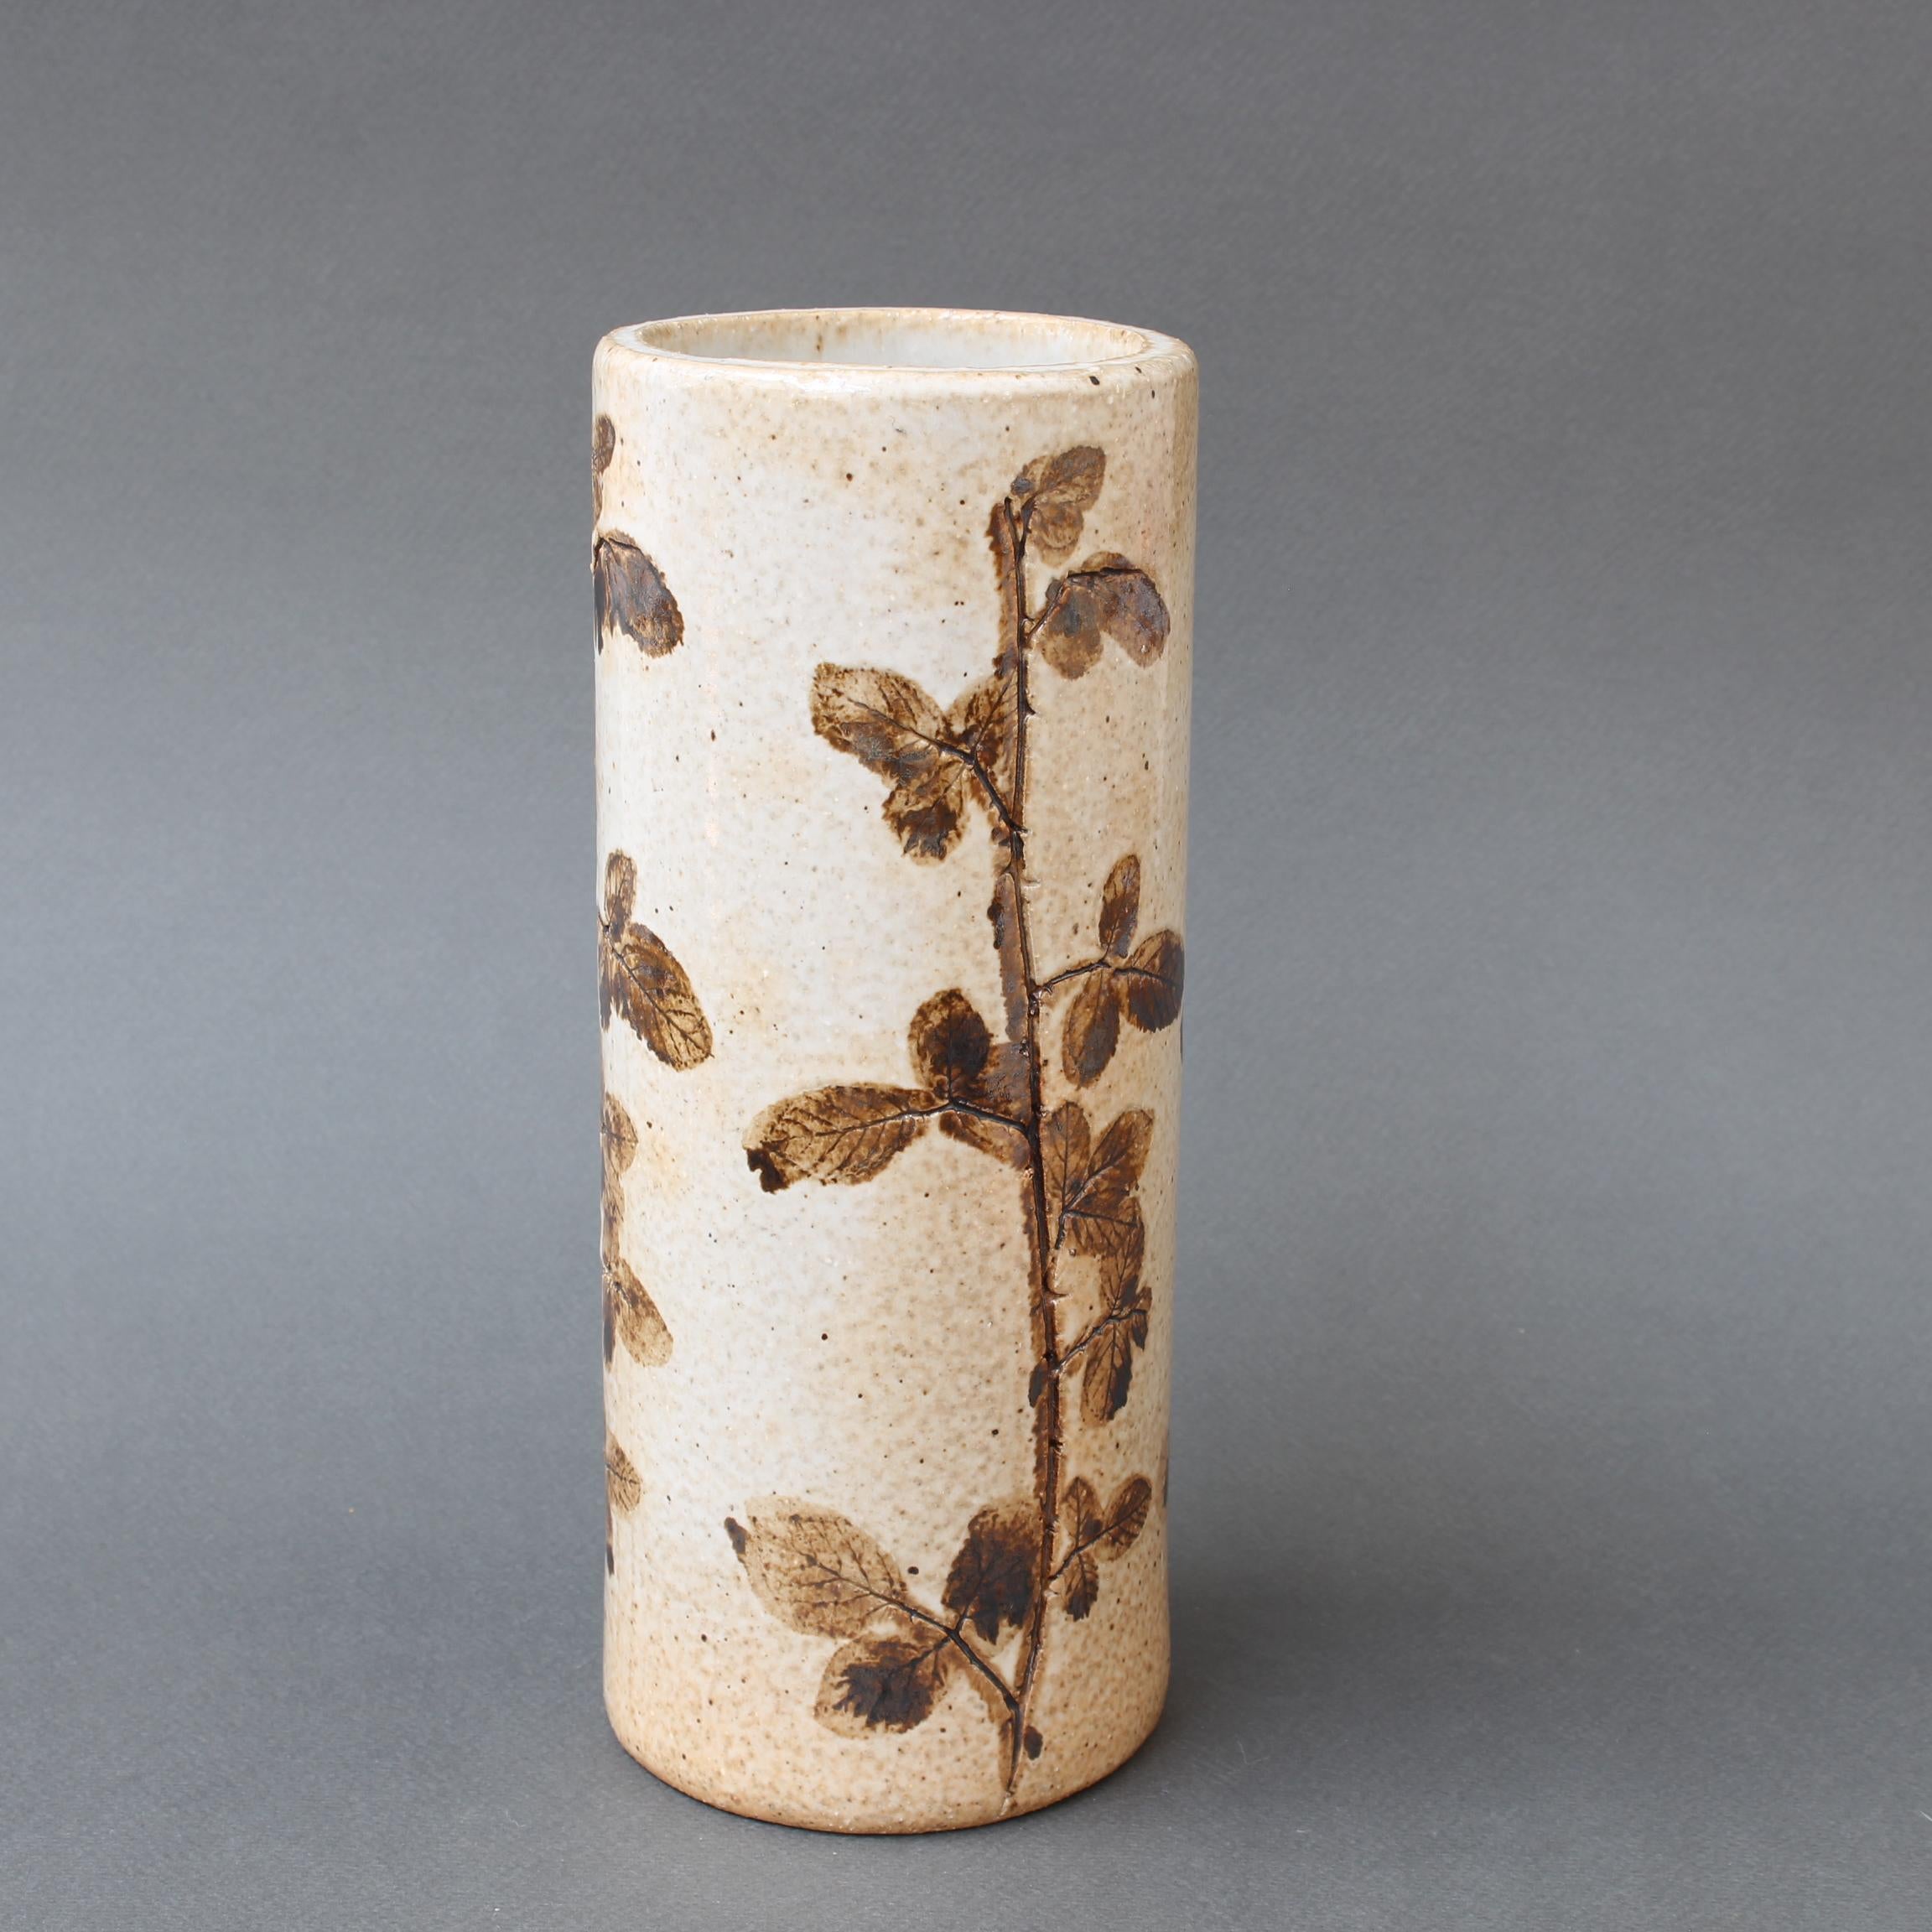 Vintage ceramic vase by Raymonde Leduc (circa 1970s). Sandstone coloured cylindrical vase with inlaid plant motifs encircling the piece. Very charming in a Provençal style. In good overall condition. In the style of Roger Capron. Please enjoy the